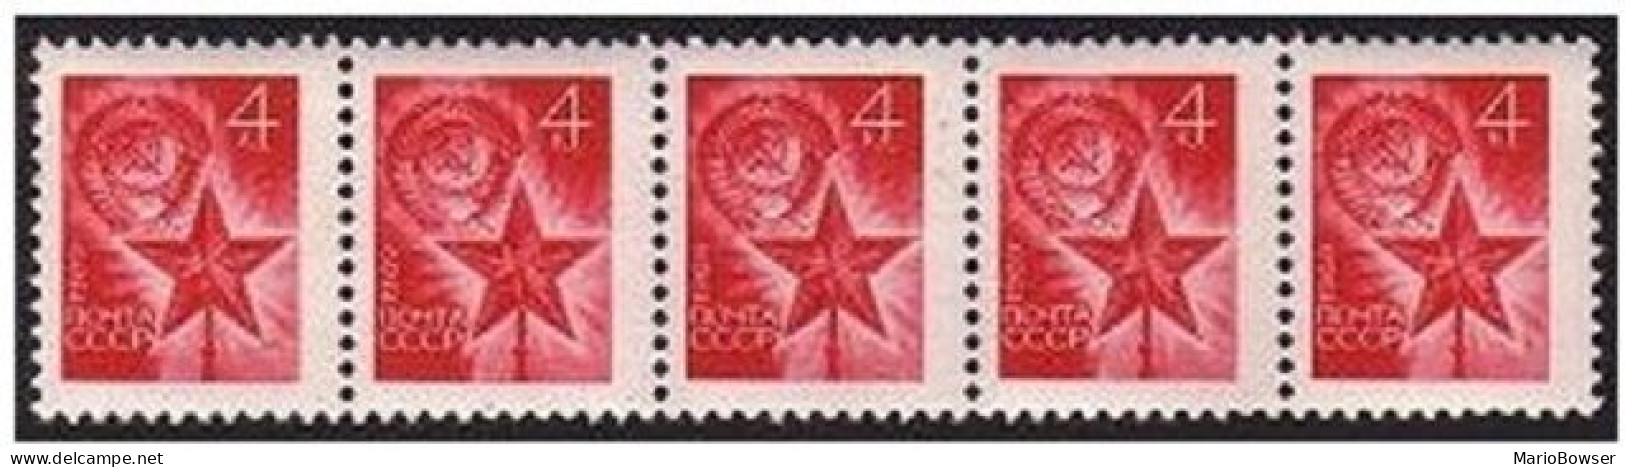 Russia 3670 Coil Strip Of 5,one With Number,MNH.Michel 3697. Arms Of USSR,Star. - Ongebruikt